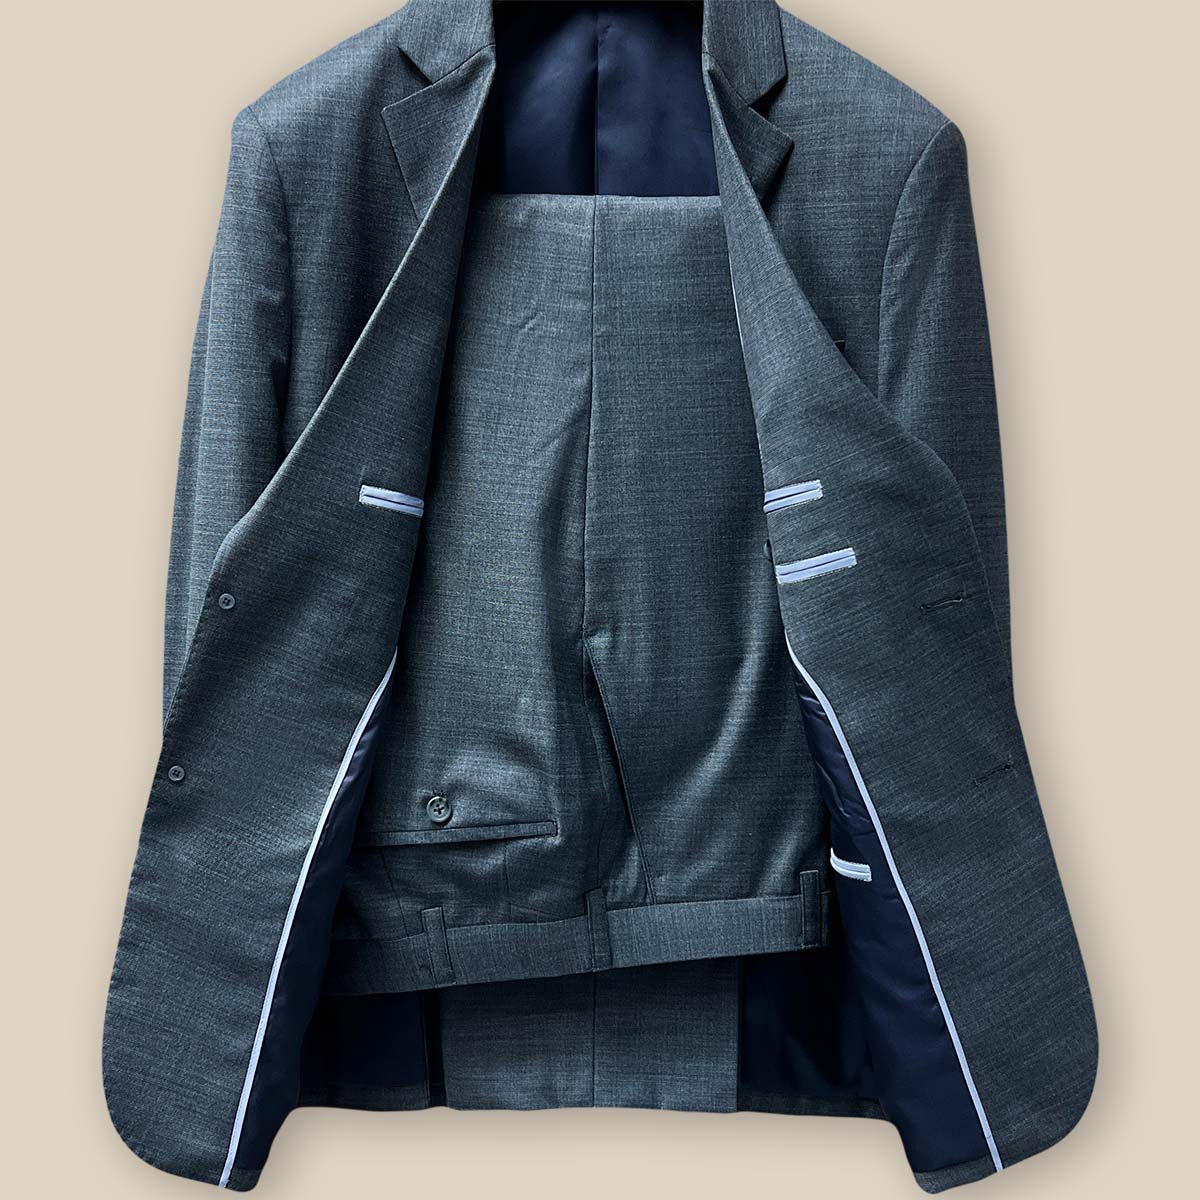 Full view of a dark grey nailhead suit, showcasing the jacket and pants together.